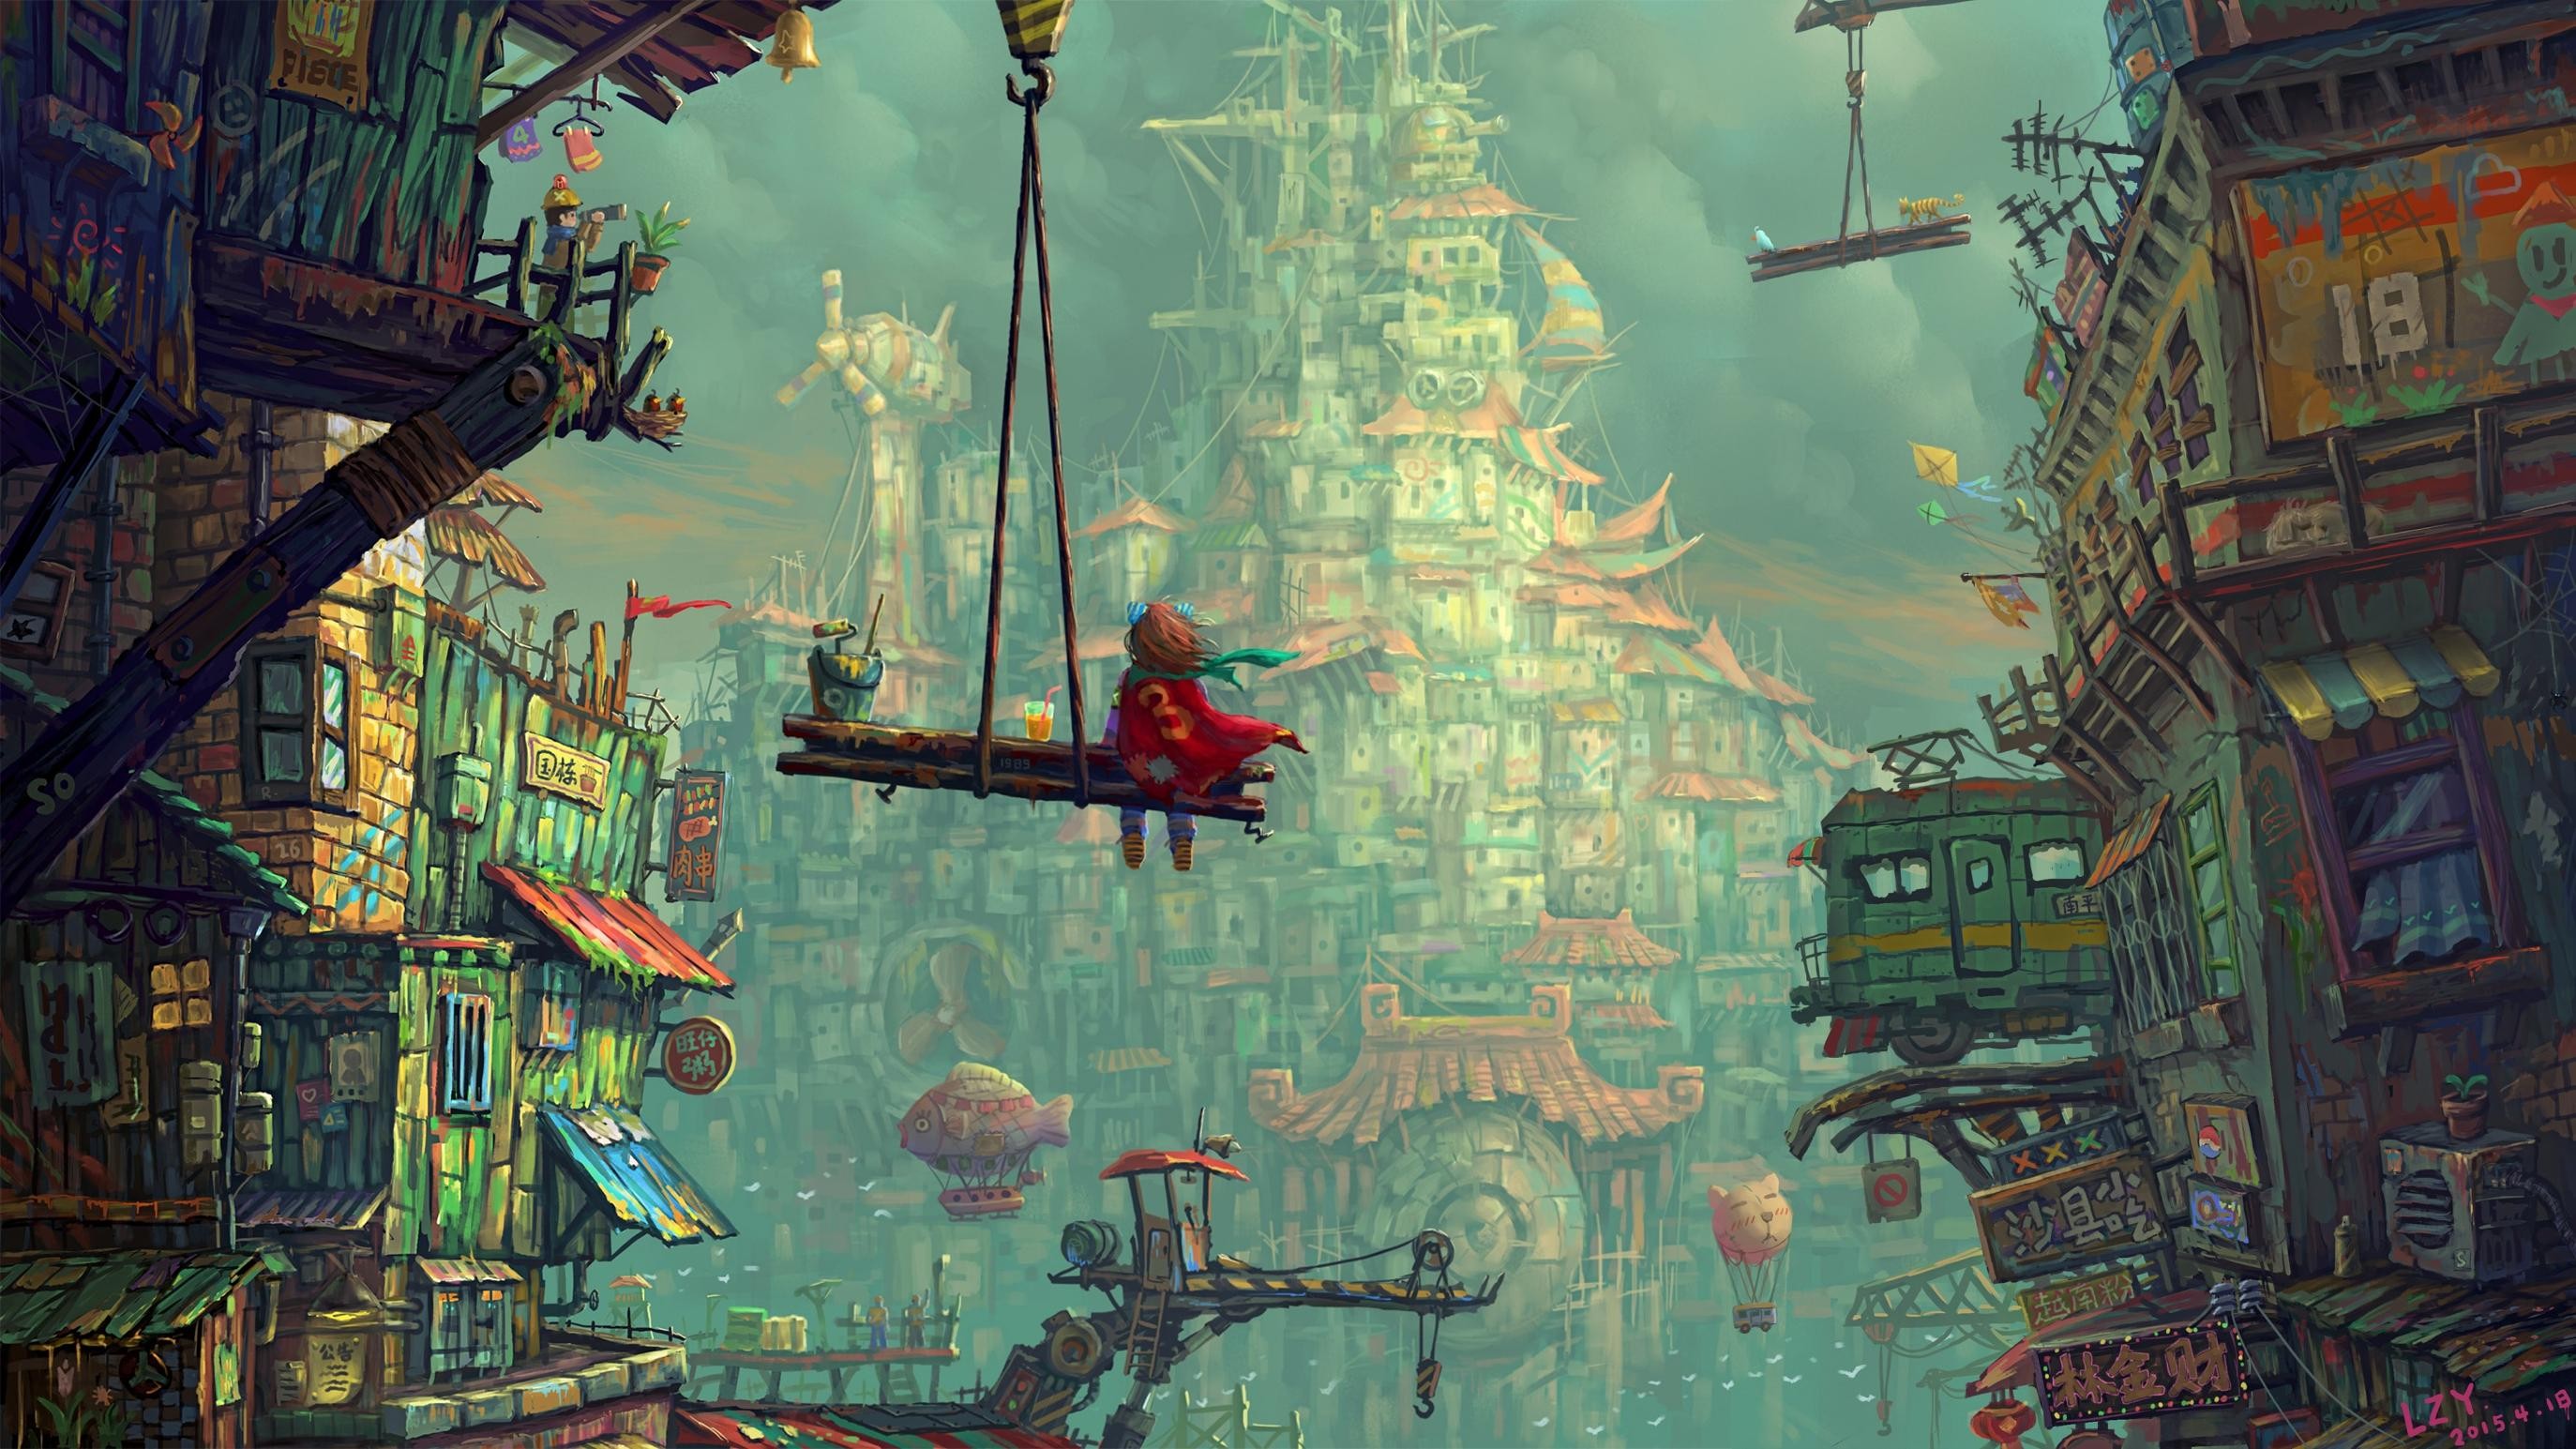 colorful-illustration-fantasy-art-city-abstract-children-clouds-screenshot-pc-game-97197.jpg